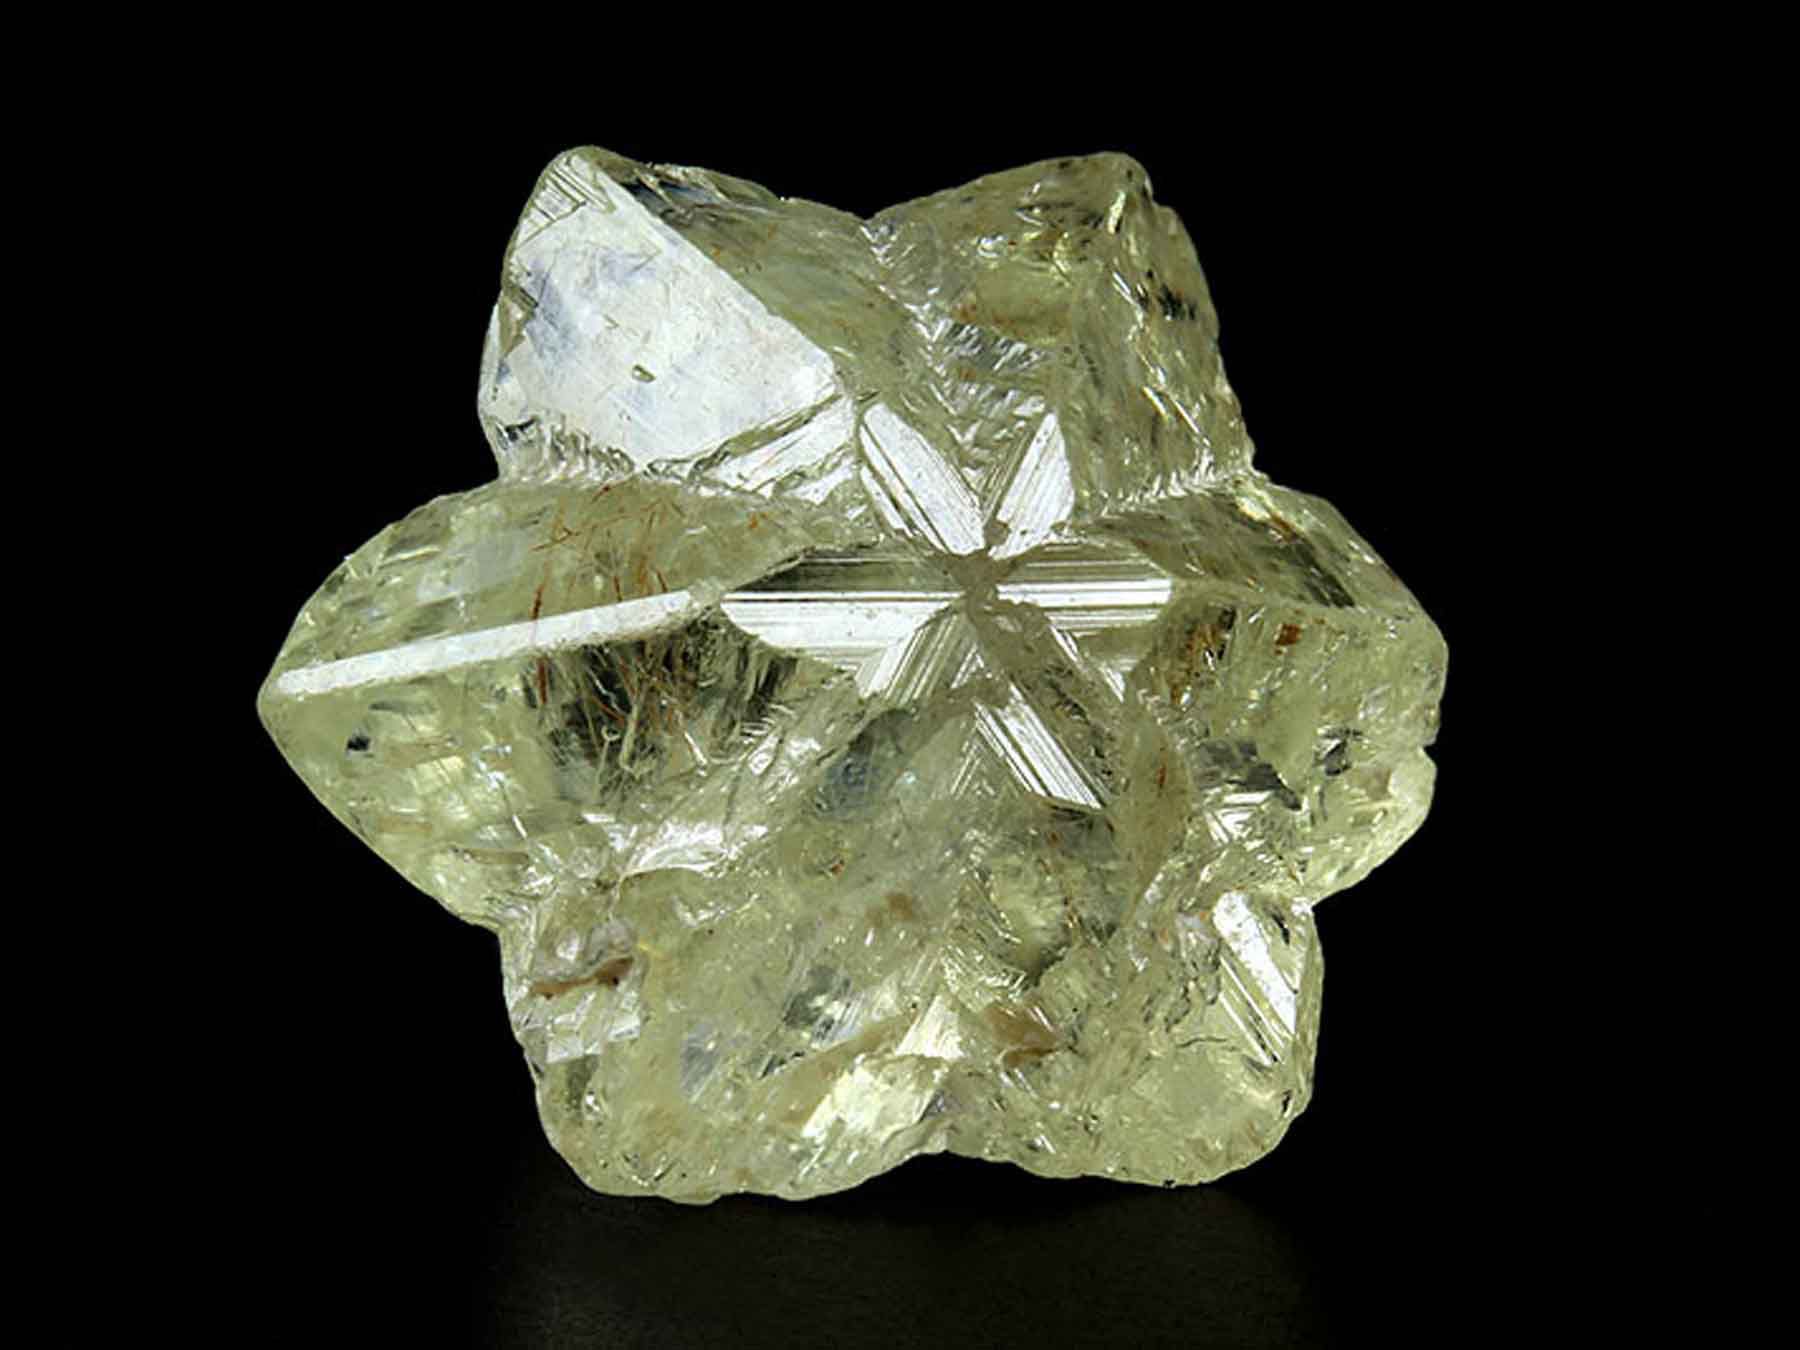 What does chrysoberyl mean